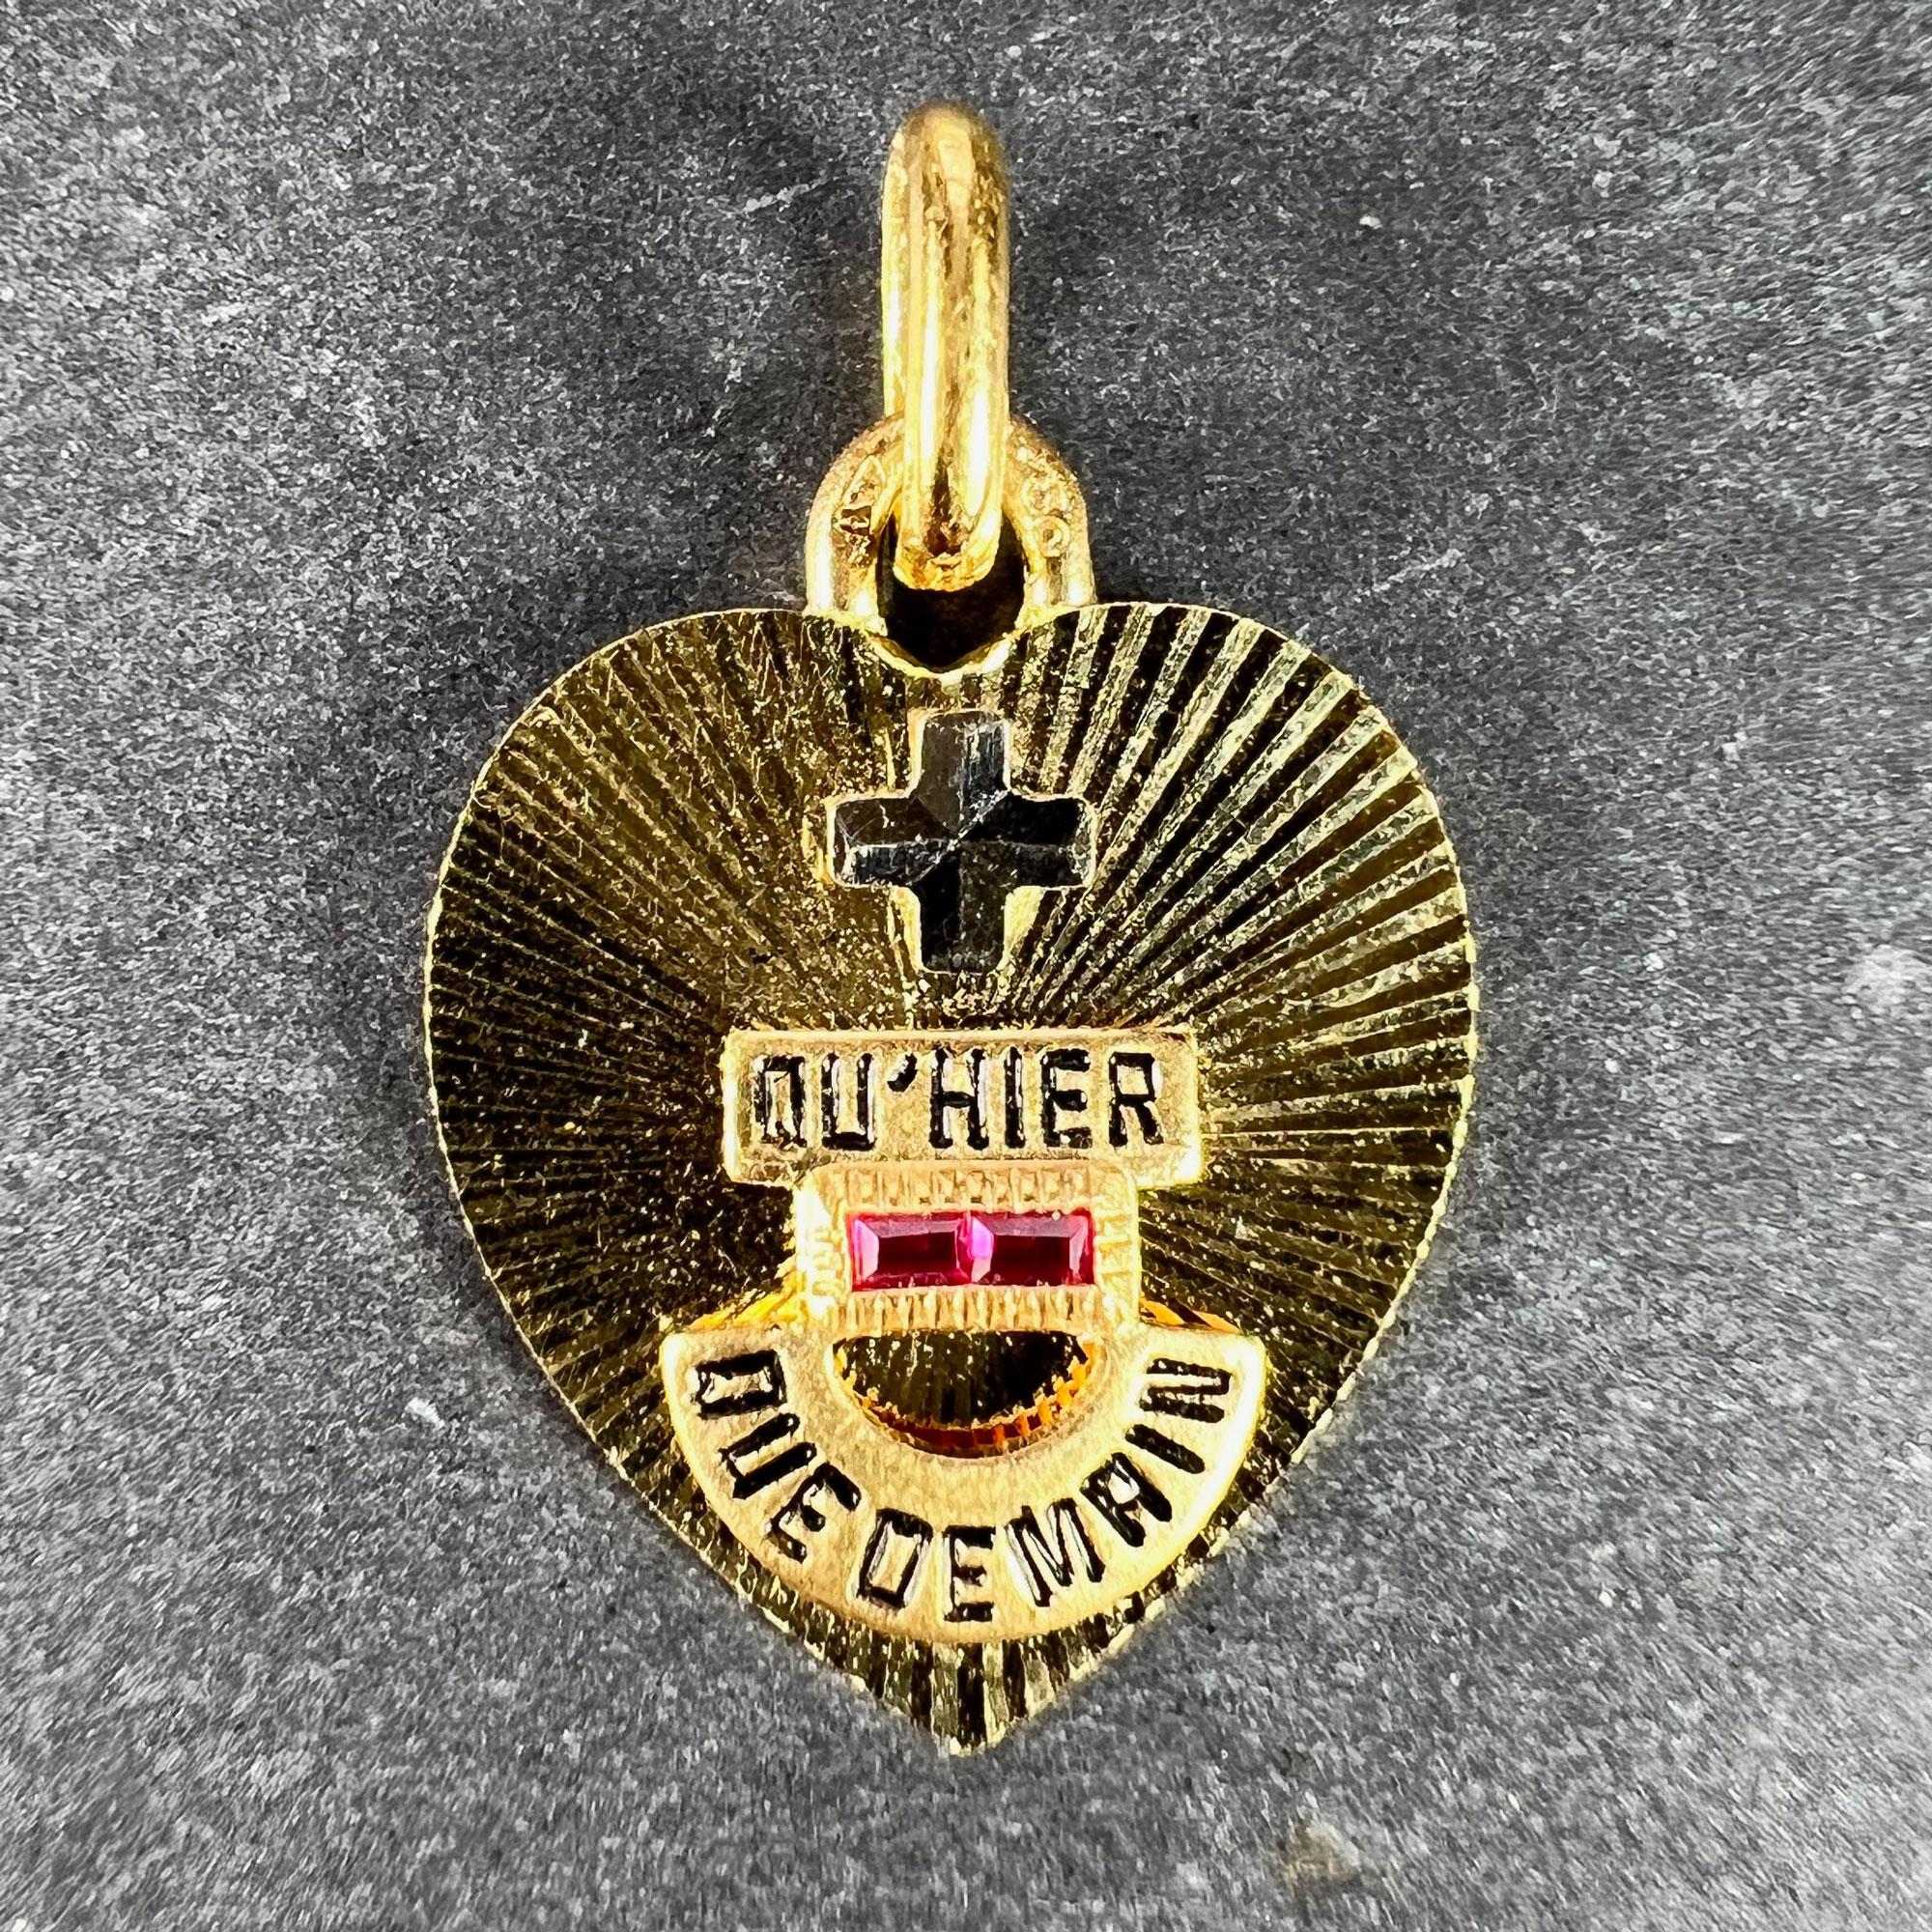 A French 18 karat (18K) yellow and white gold, enamel and ruby love charm pendant with a rebus spelling out 